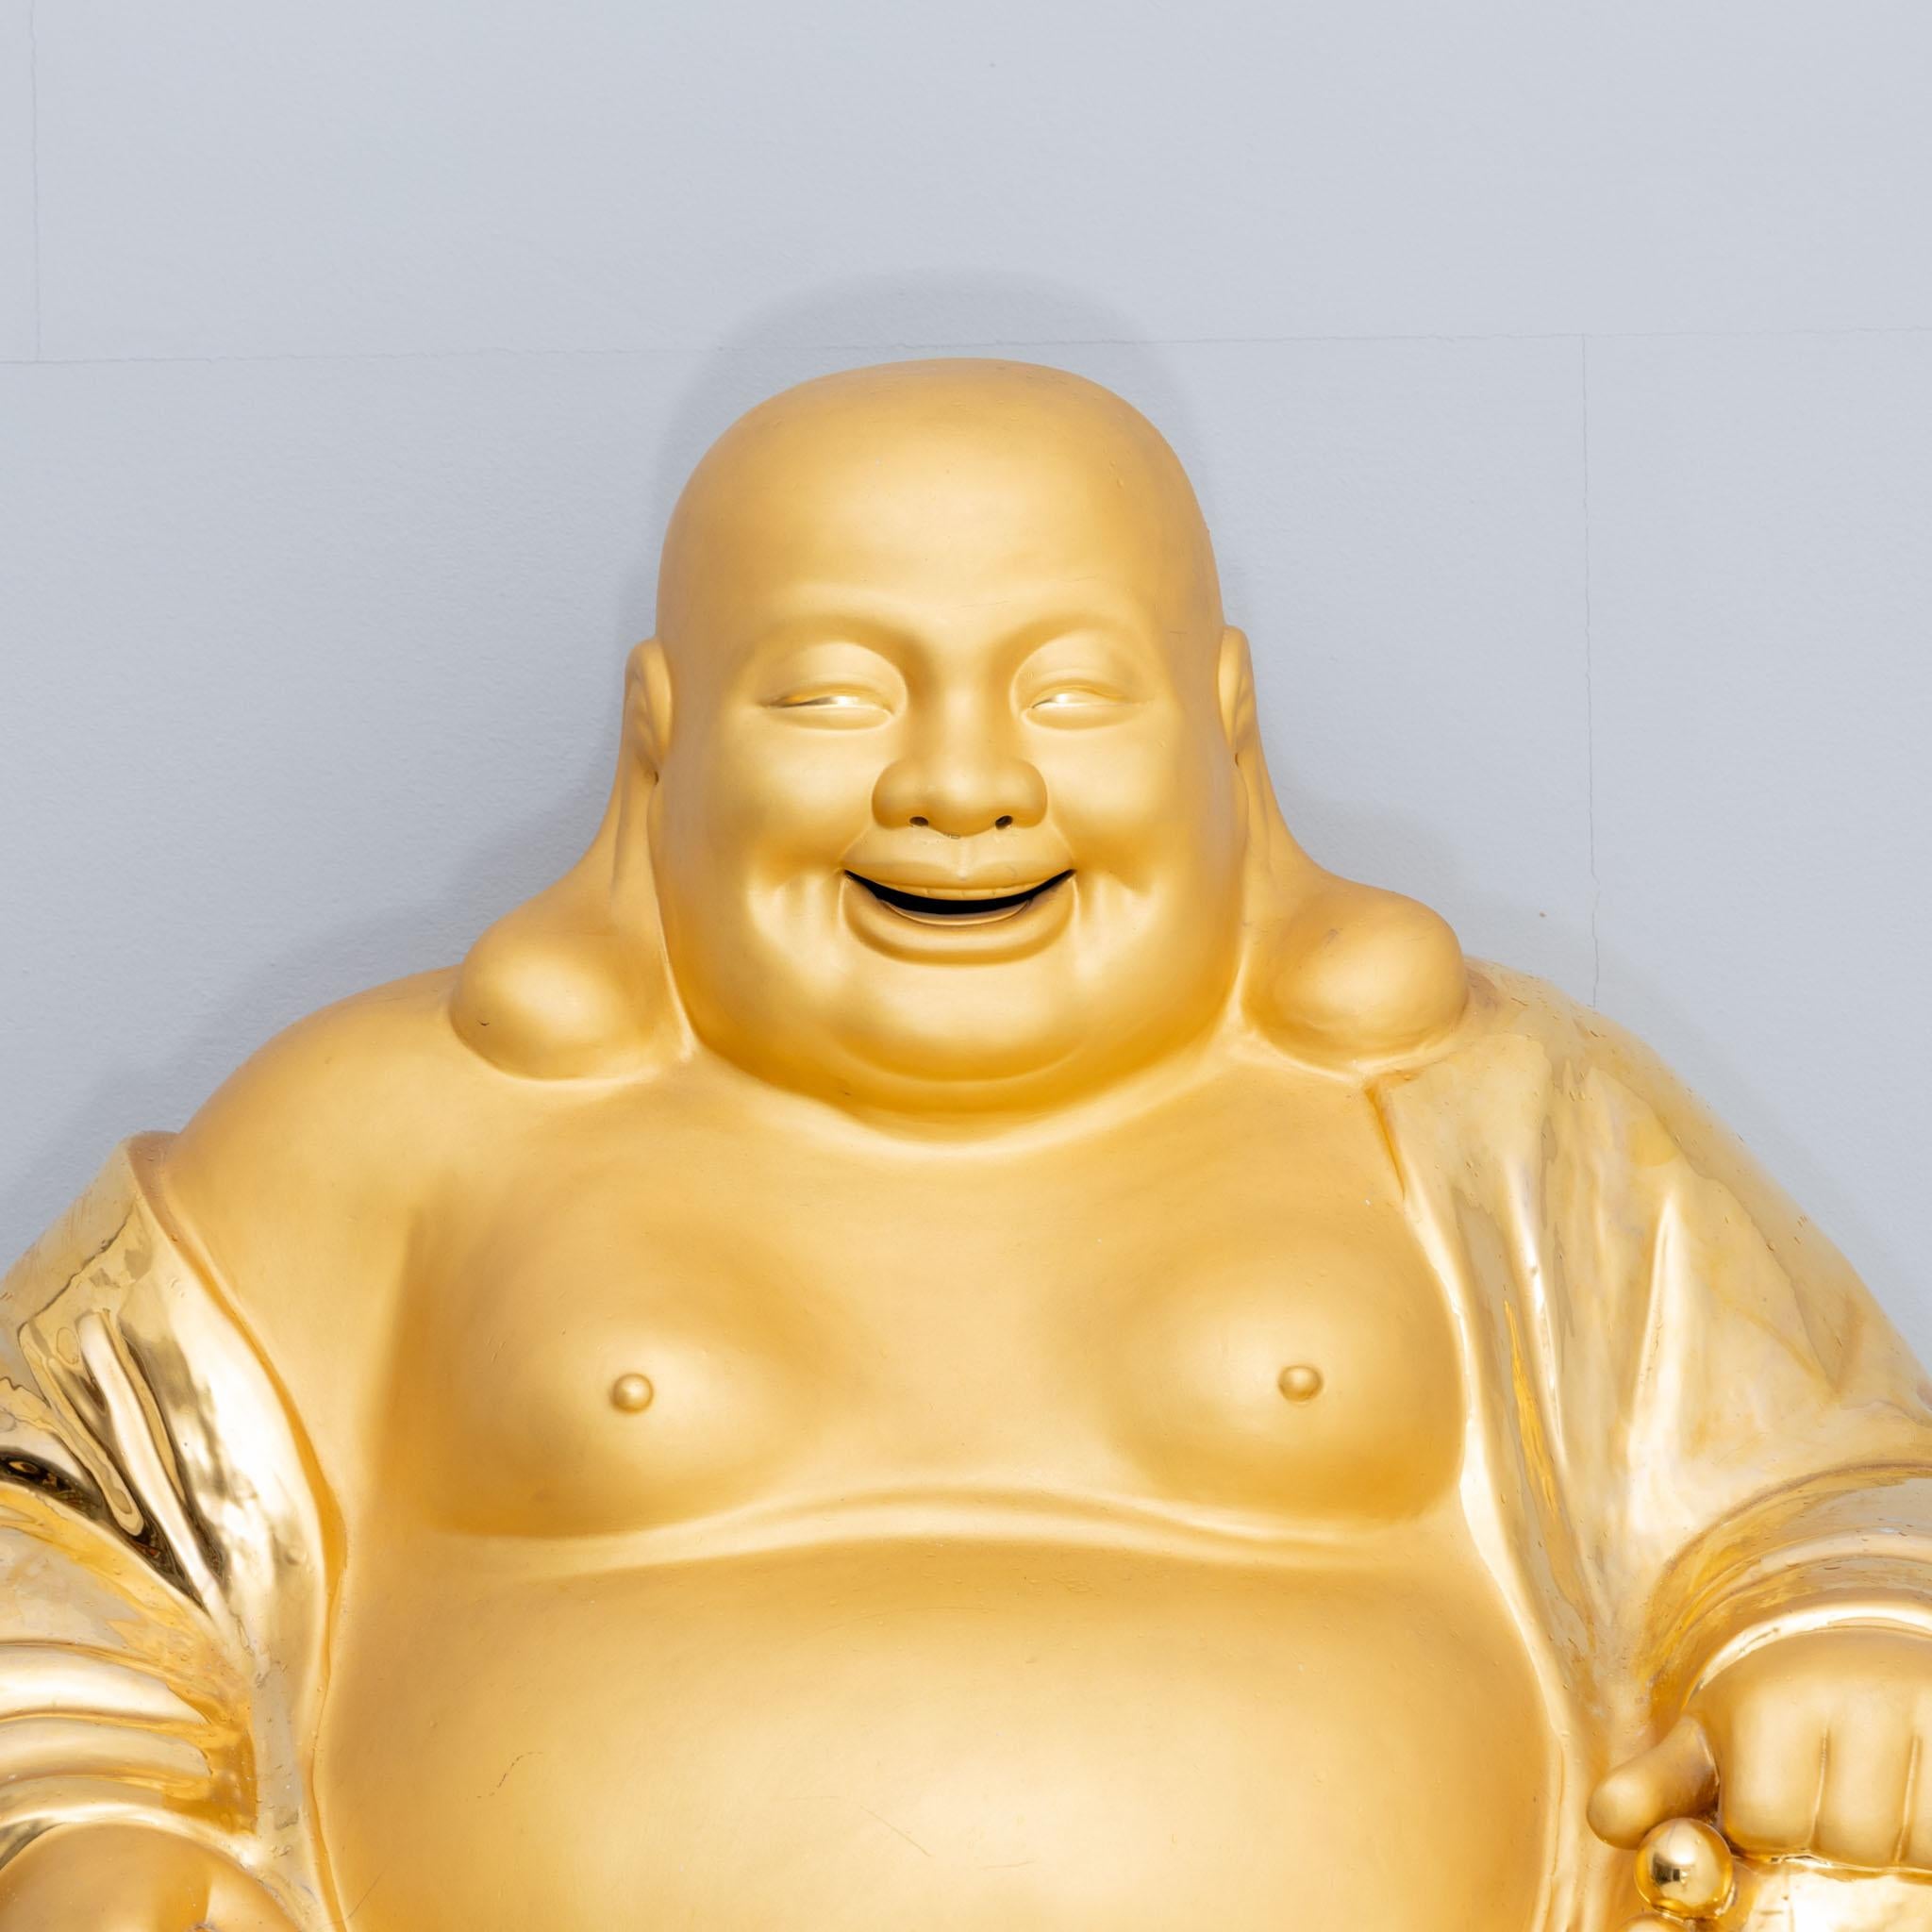 Golden Laughing Buddha Made of Porcelain, 20th Century For Sale 4